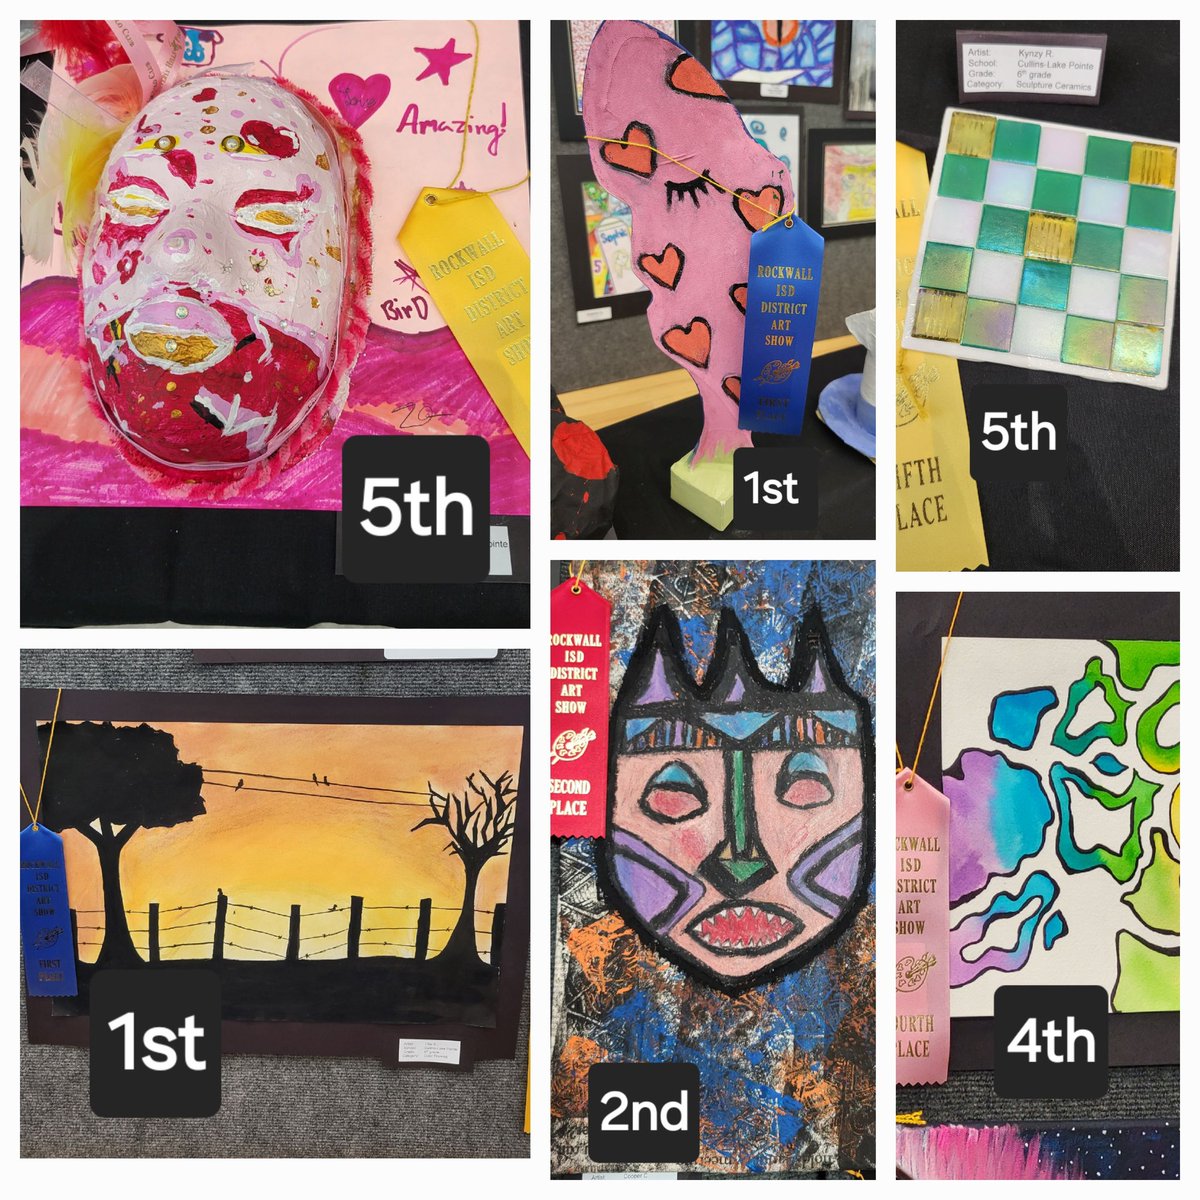 I am so proud of my students and their creativity. I'm very honored to be their Art Teacher!! @CLP_Elementary @risdfinearts #ArtSmart